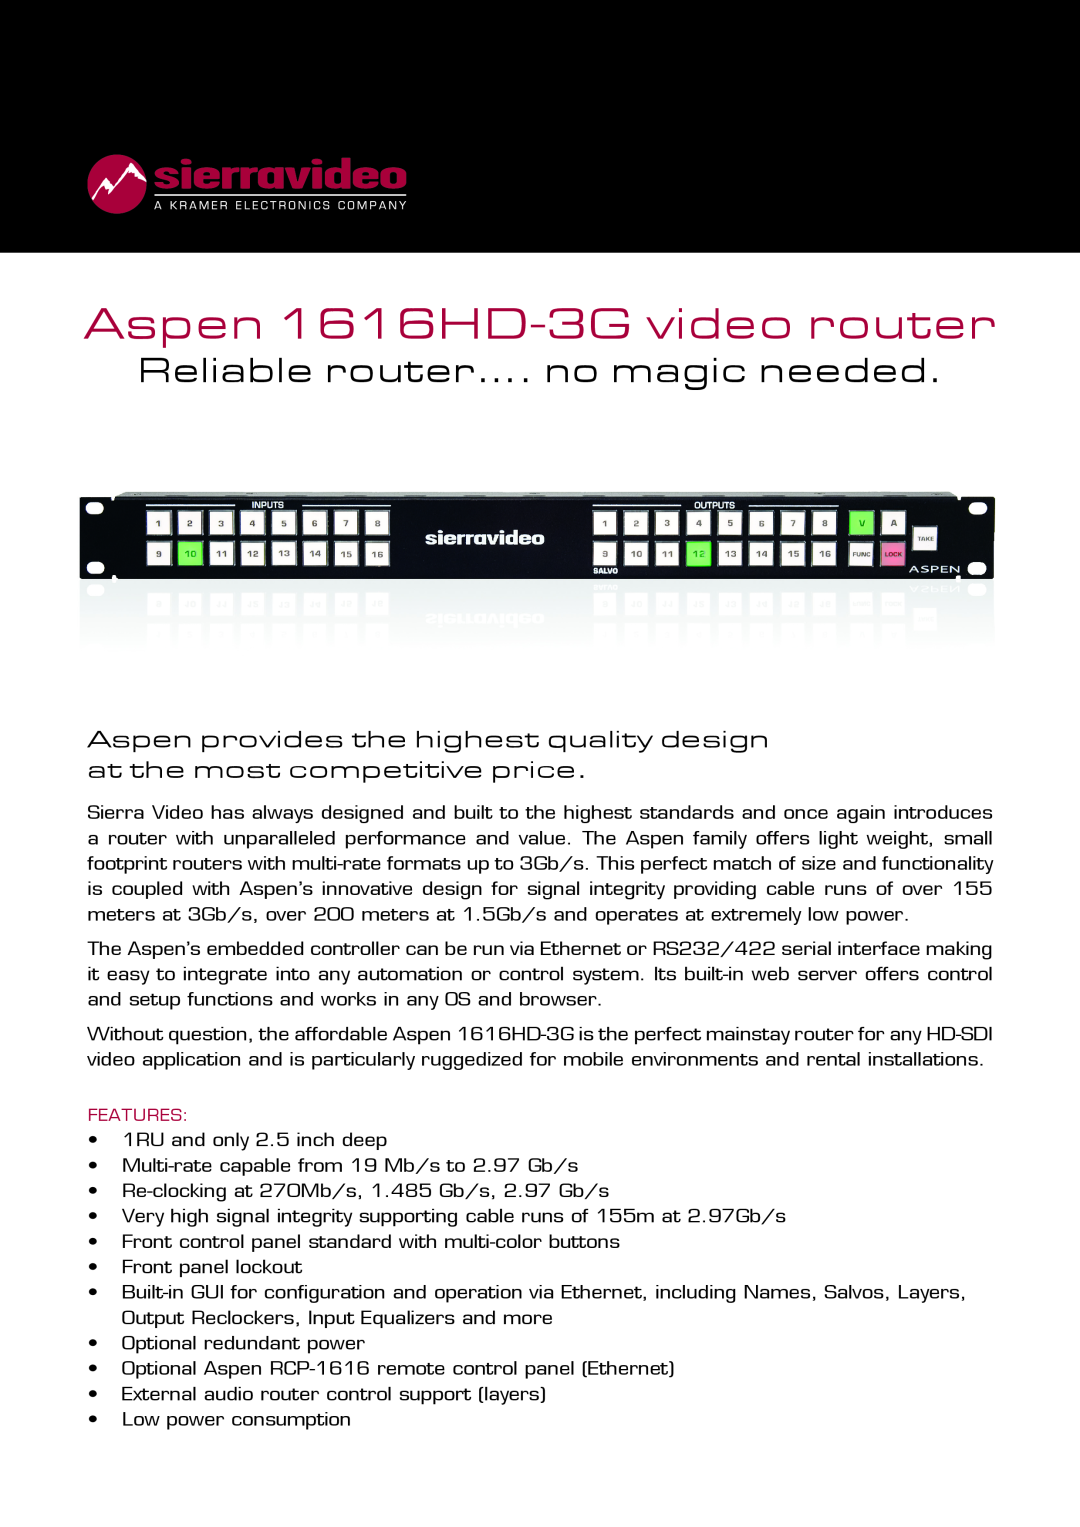 Sierra manual Aspen 1616HD-3G video router, Reliable router…. no magic needed 